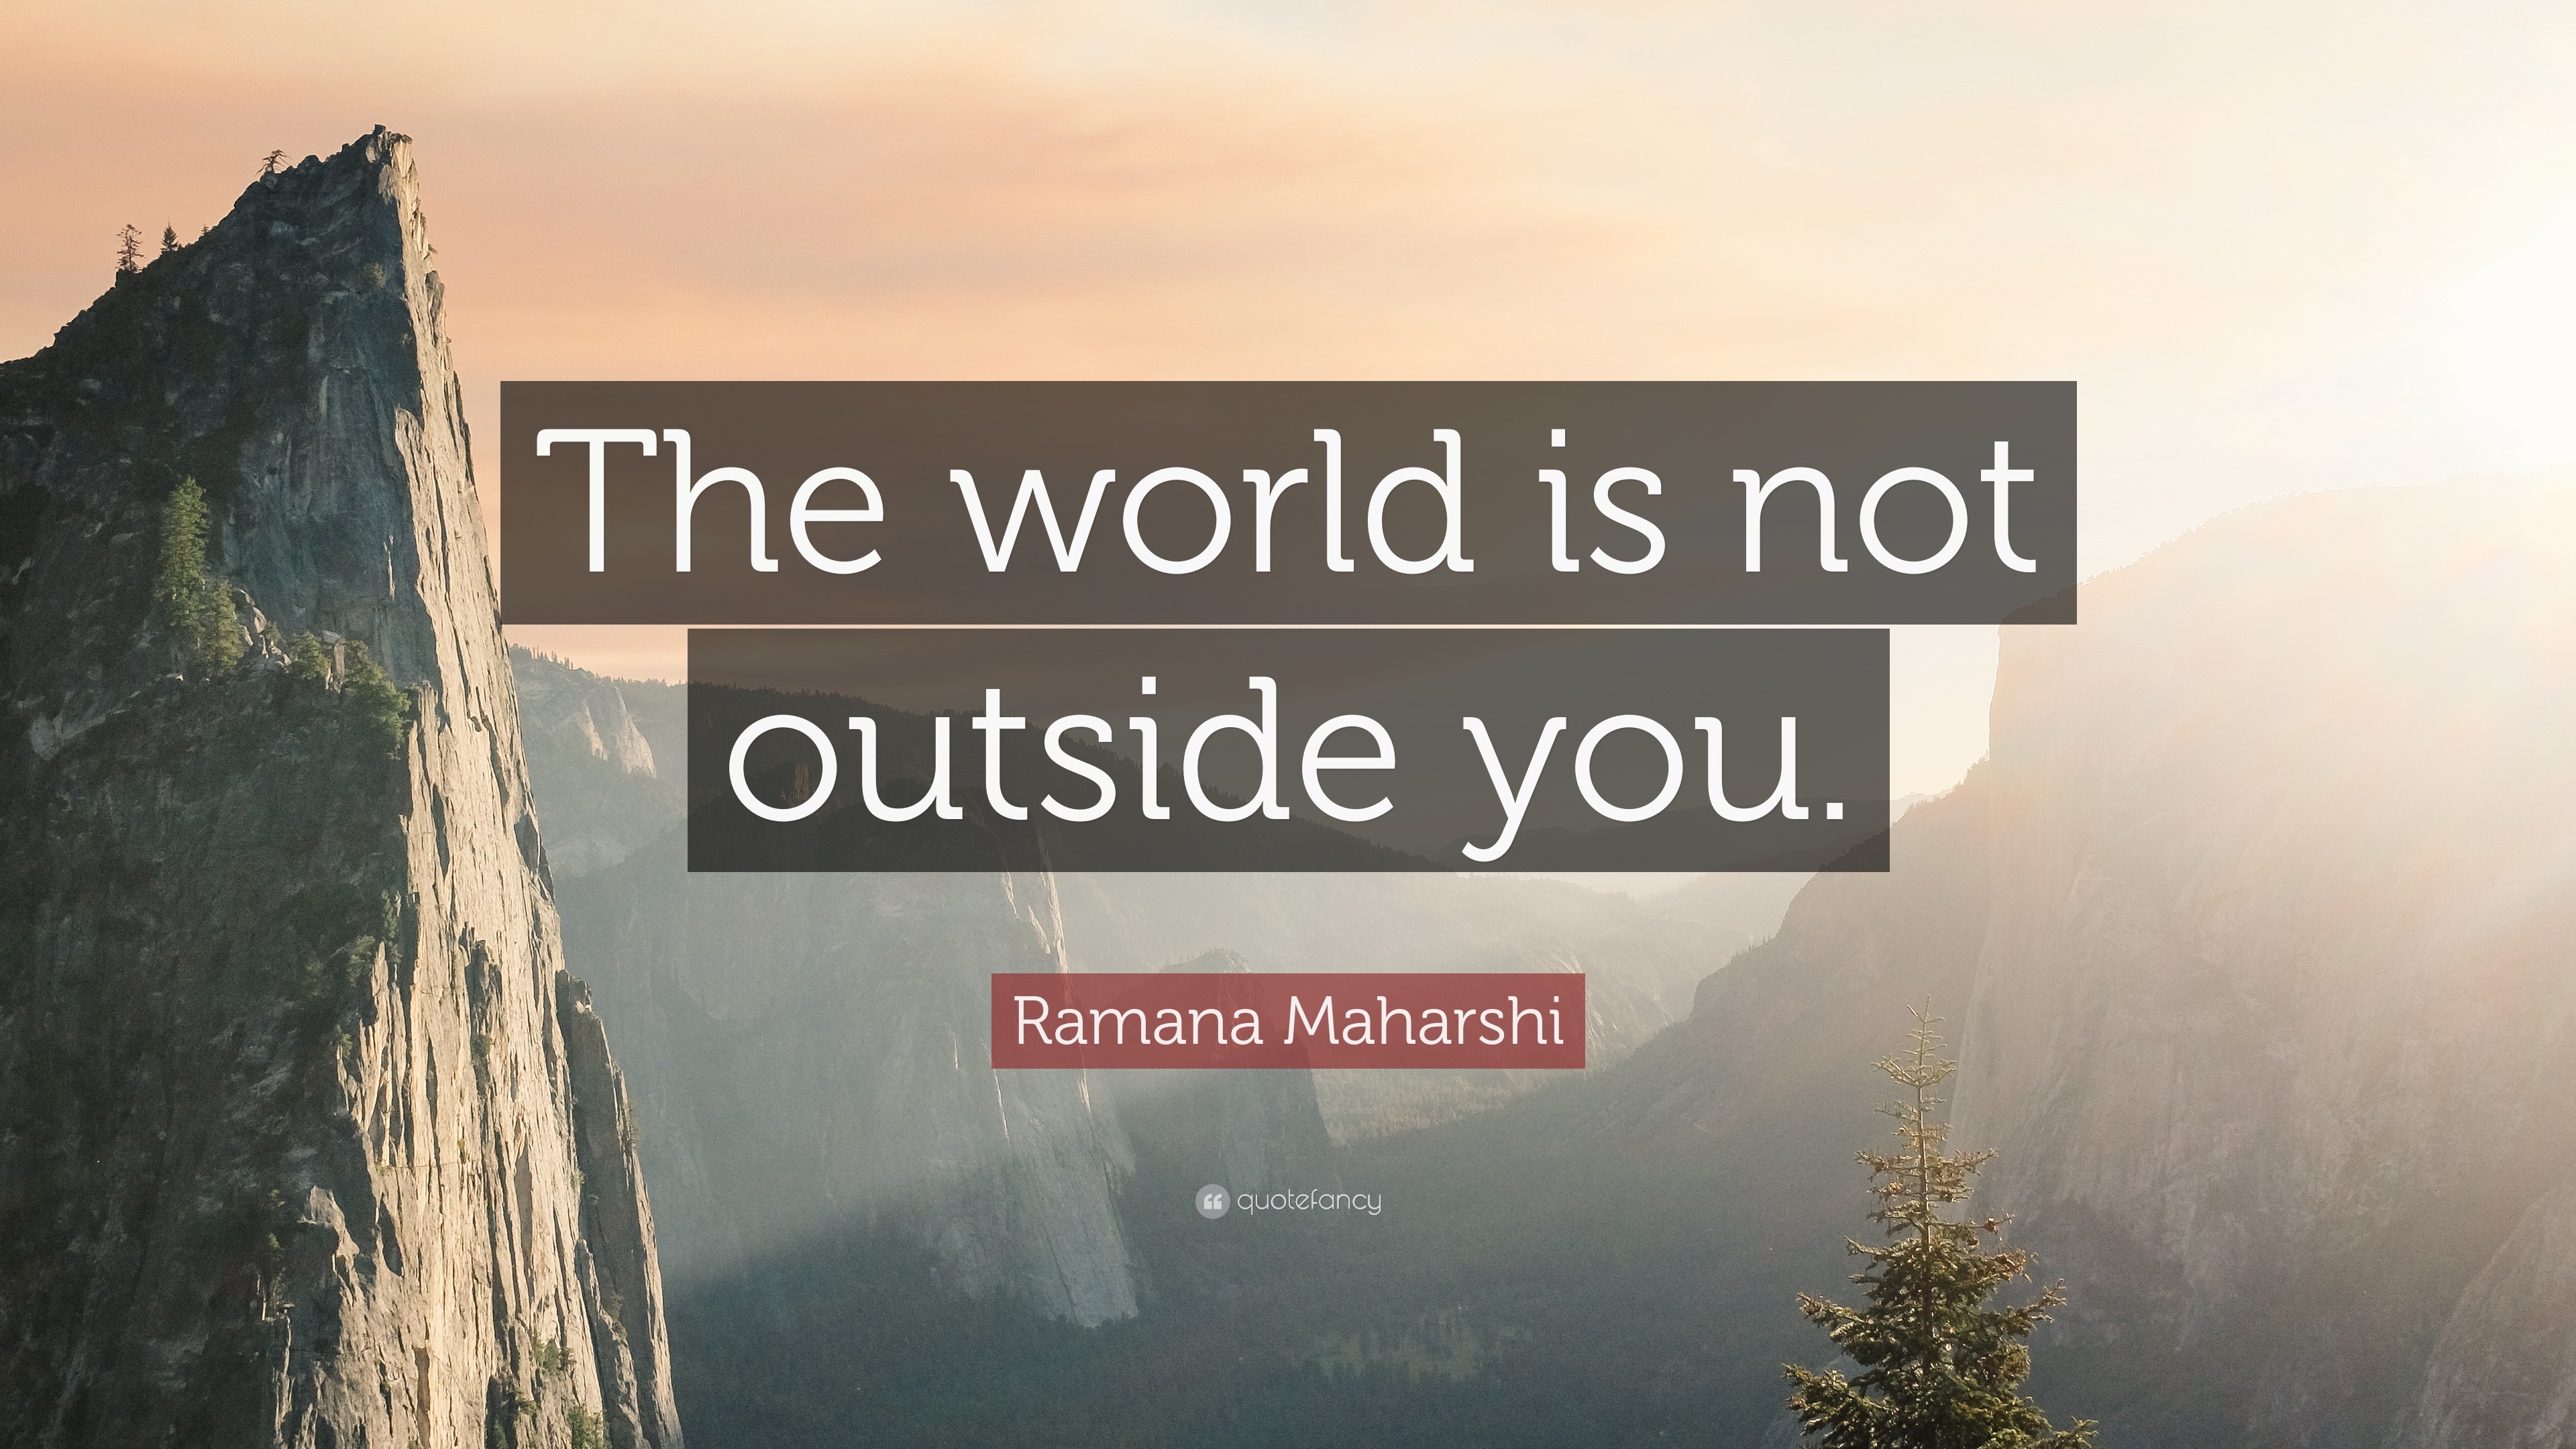 688919 Ramana Maharshi Quote The world is not outside you